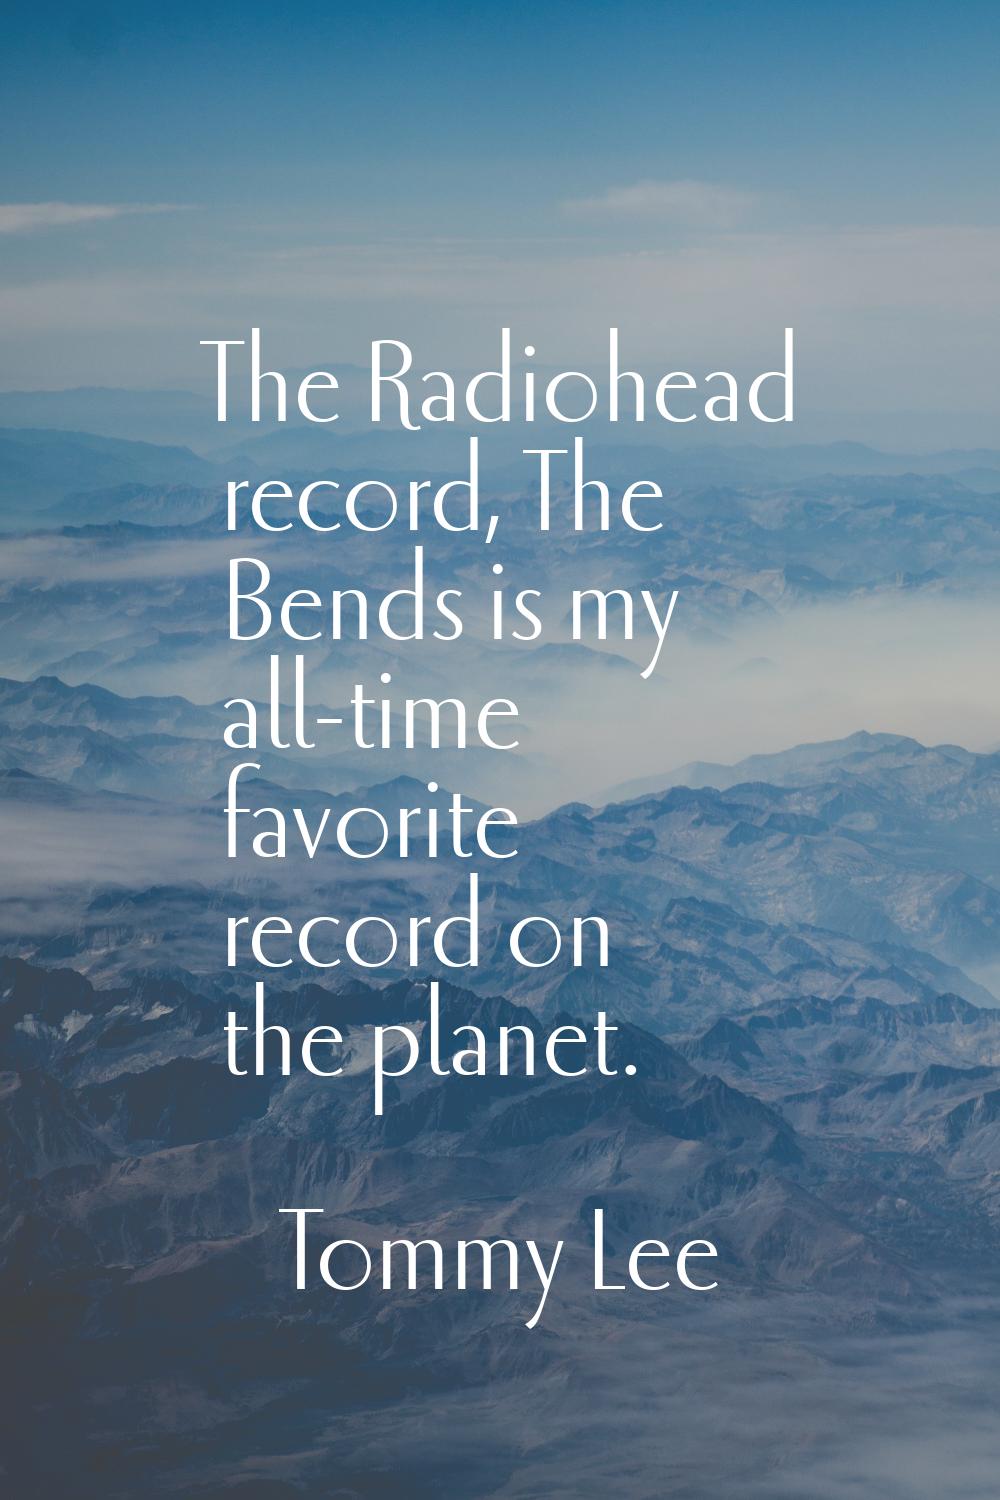 The Radiohead record, The Bends is my all-time favorite record on the planet.